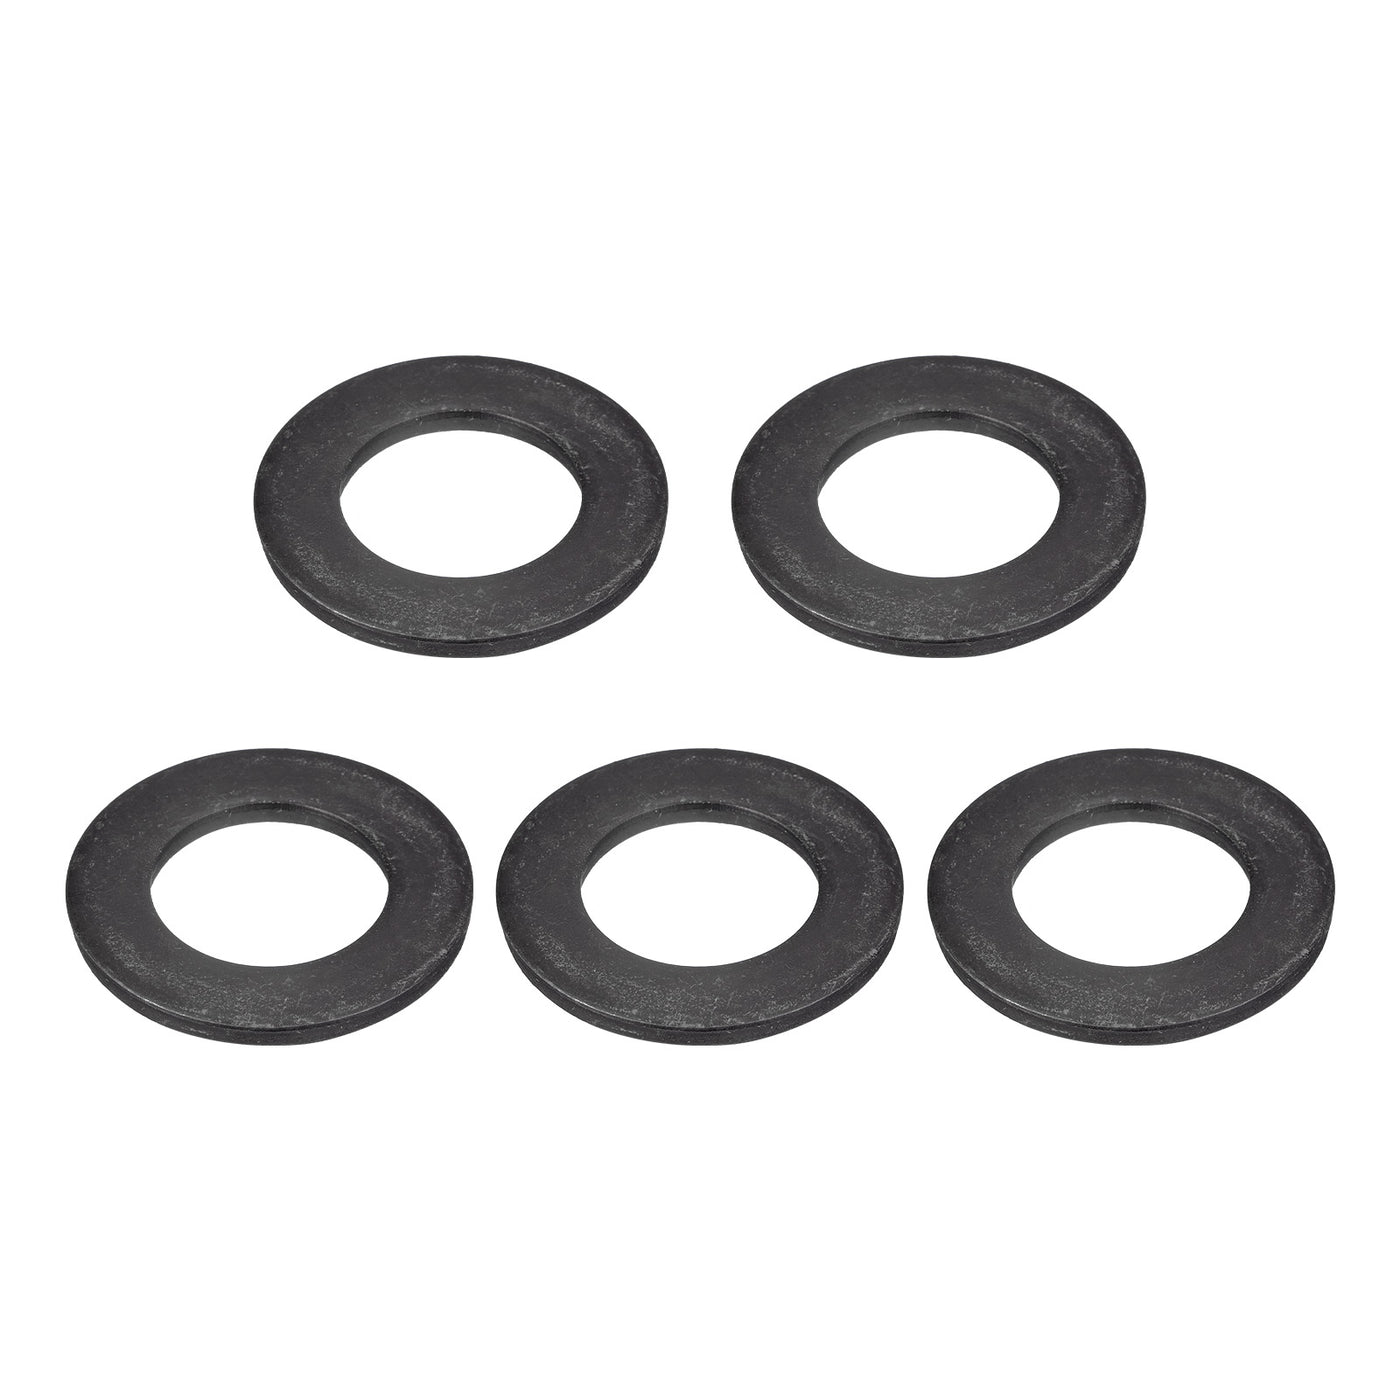 uxcell Uxcell M24 Carbon Steel Flat Washer 5pcs 25x43.8x3.8mm Grade 8.8 Alloy Steel Fasteners